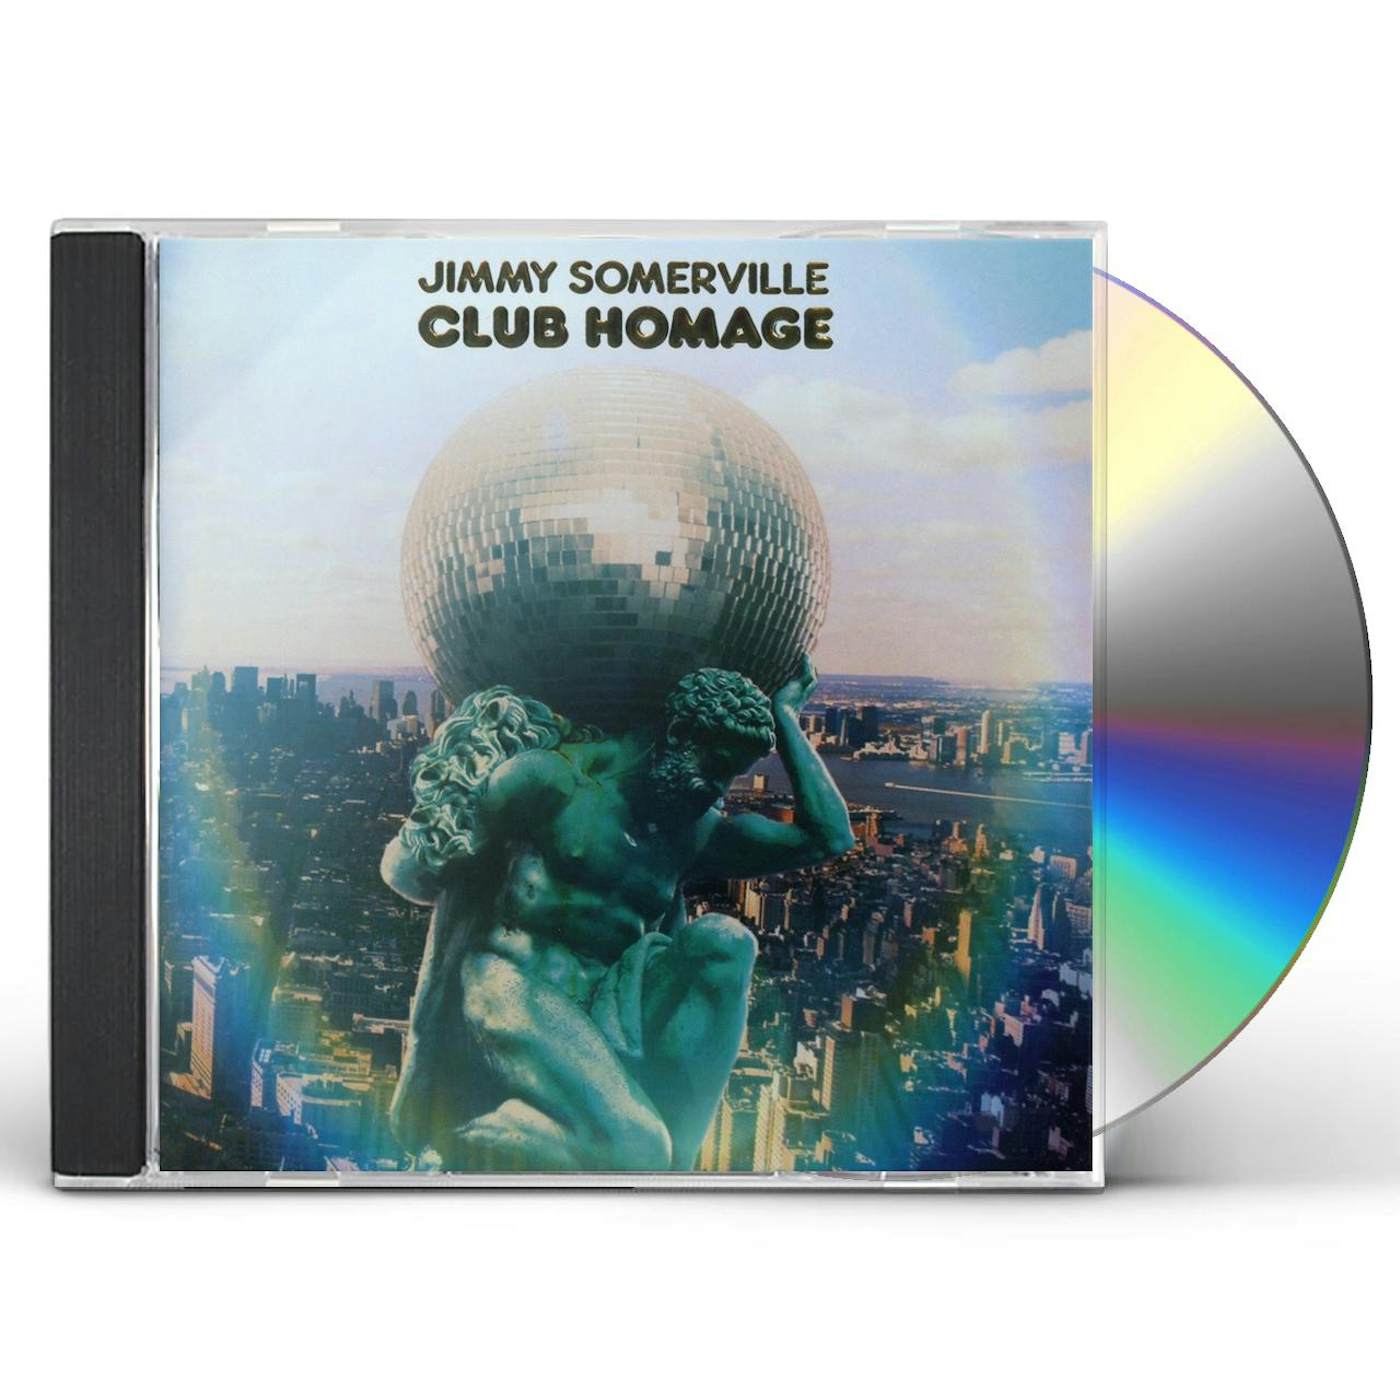 Jimmy Somerville CLUB HOMAGE CD